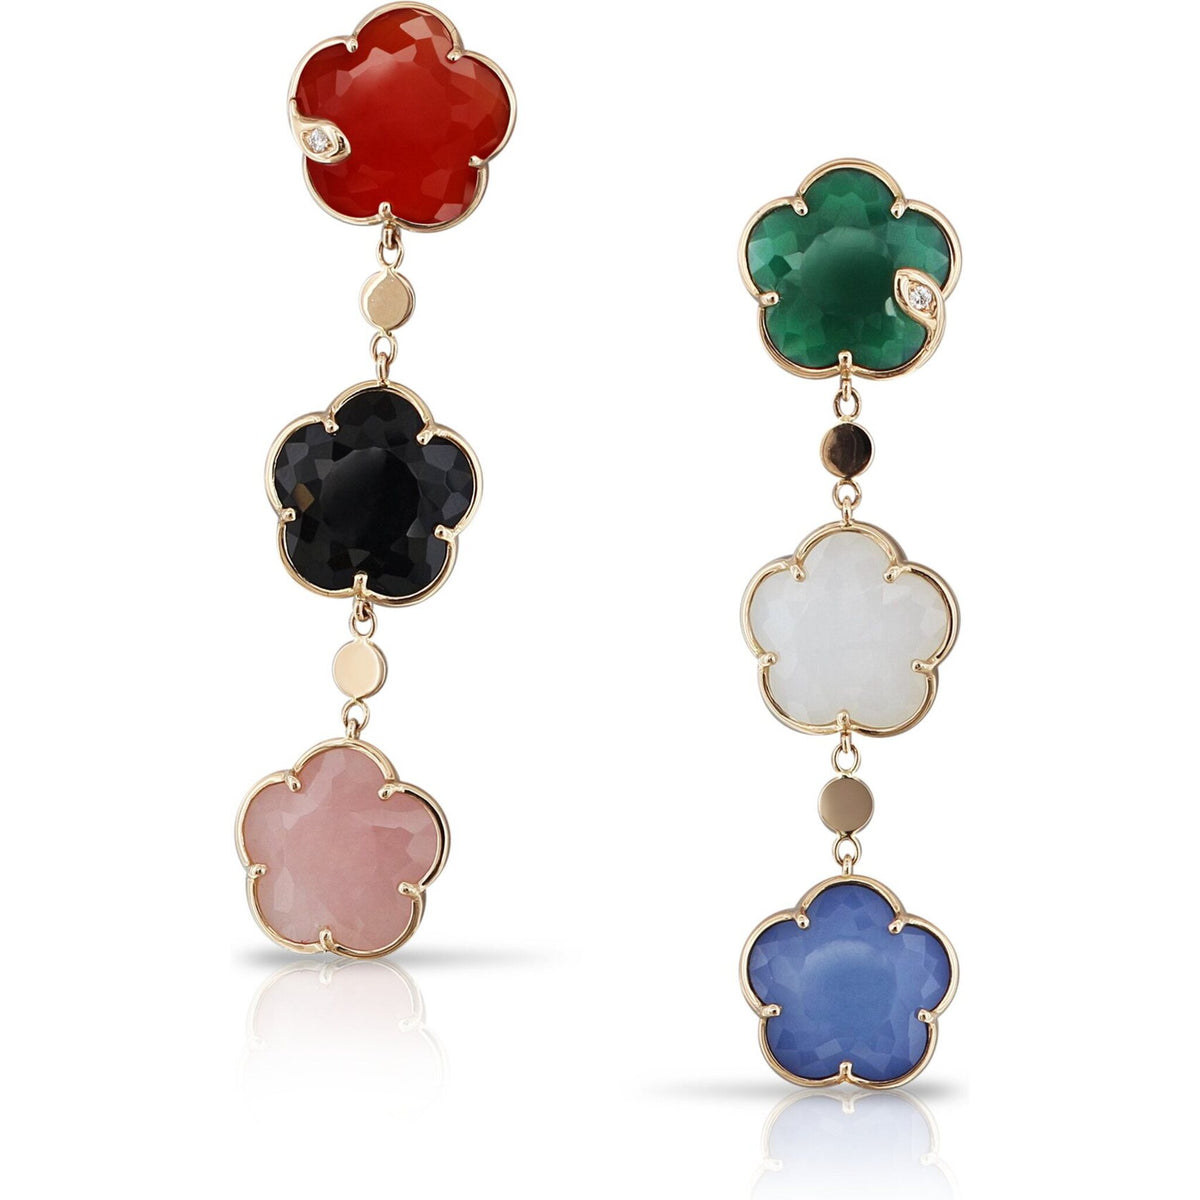 Pasquale Bruni - Petit Joli Chandelier Earrings in 18k Rose Gold with Green and White Agate, Onyx, White Agate and Lapis Lazuli Doublet, Pink Chalcedony, Carnelian and Diamonds